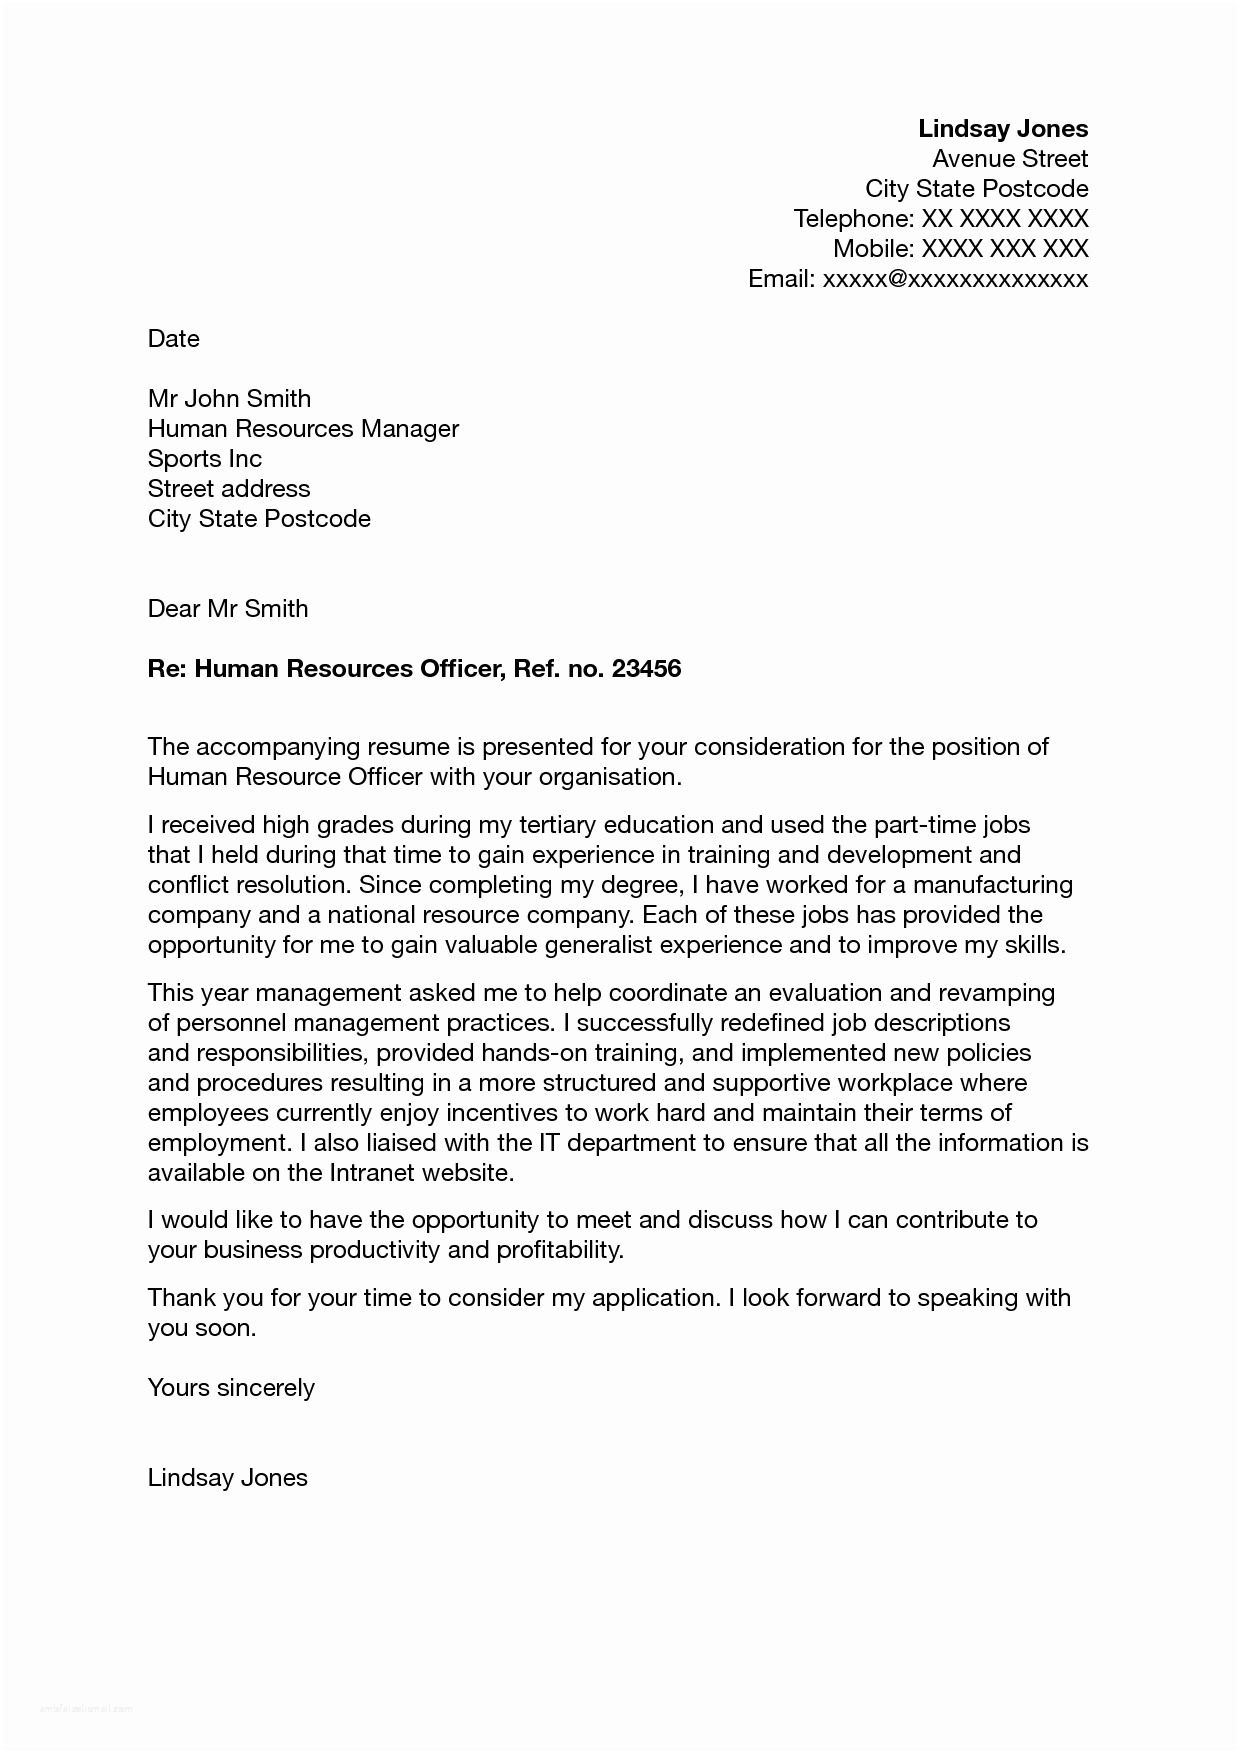 Human Resource Officer Application Letter